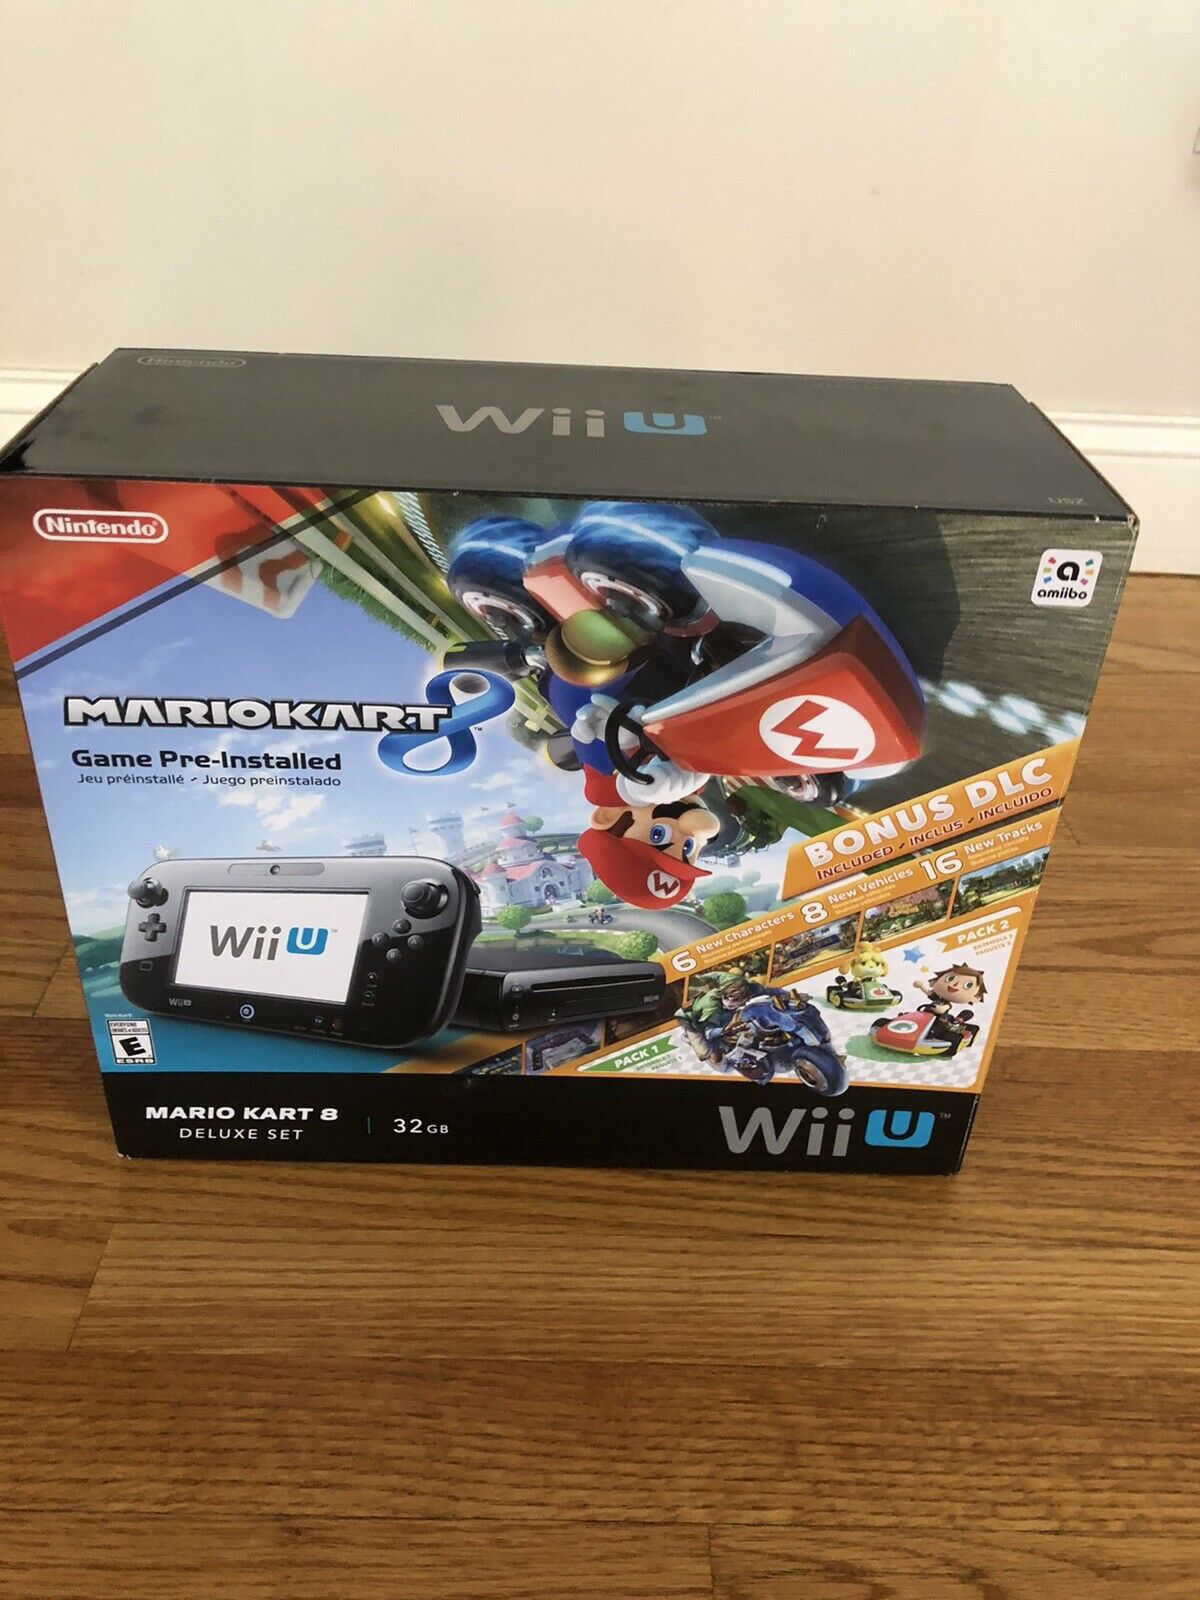 Nintendo Wii U 32gb Mario Kart 8 Deluxe Bundle Console And14 Extra Video Games Free Ship 1350